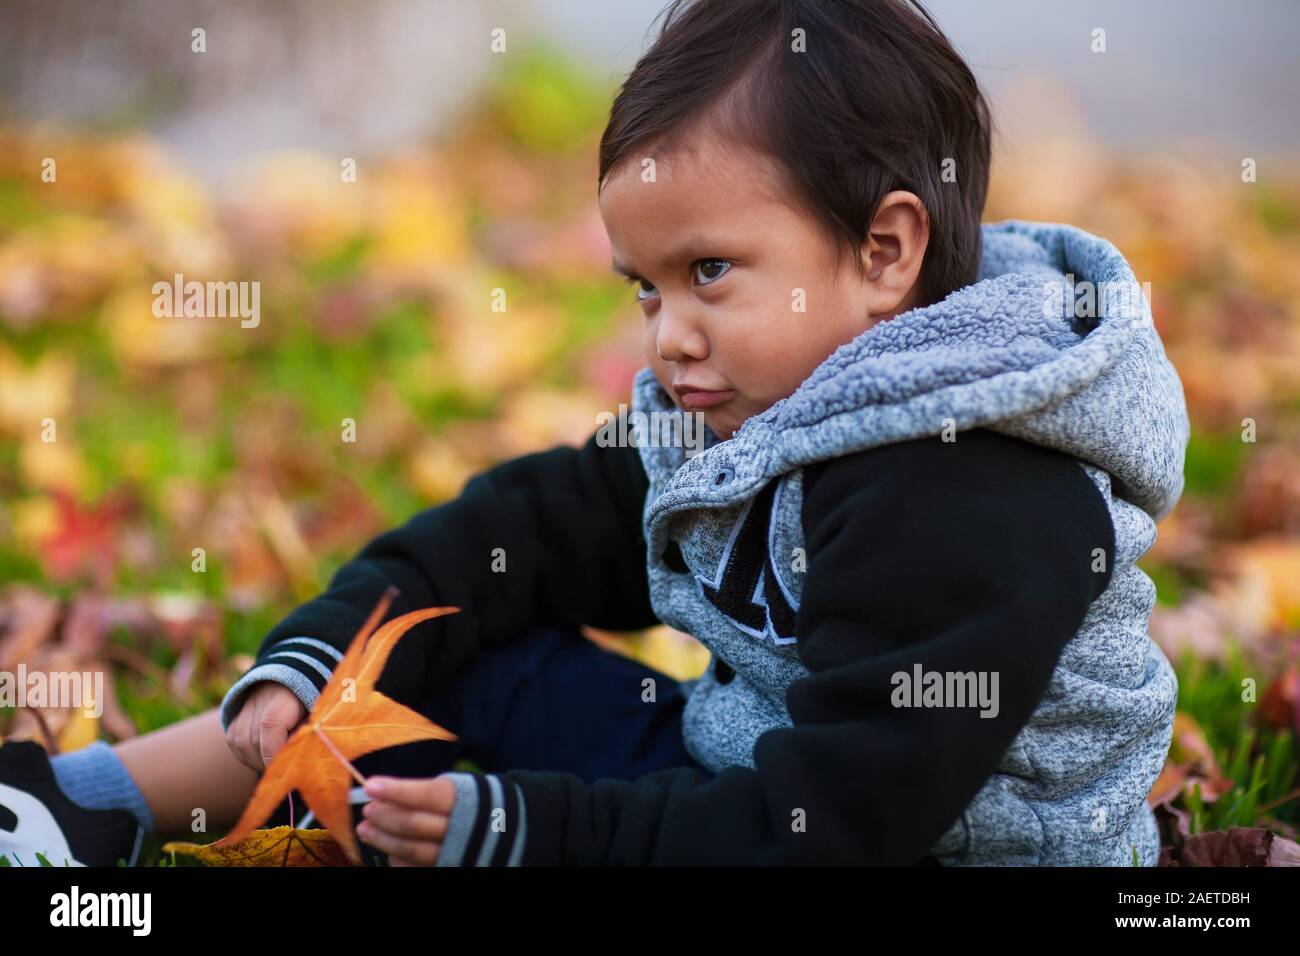 A toddler boy wearing a jacket during the fall season with an upset facial expression. Stock Photo